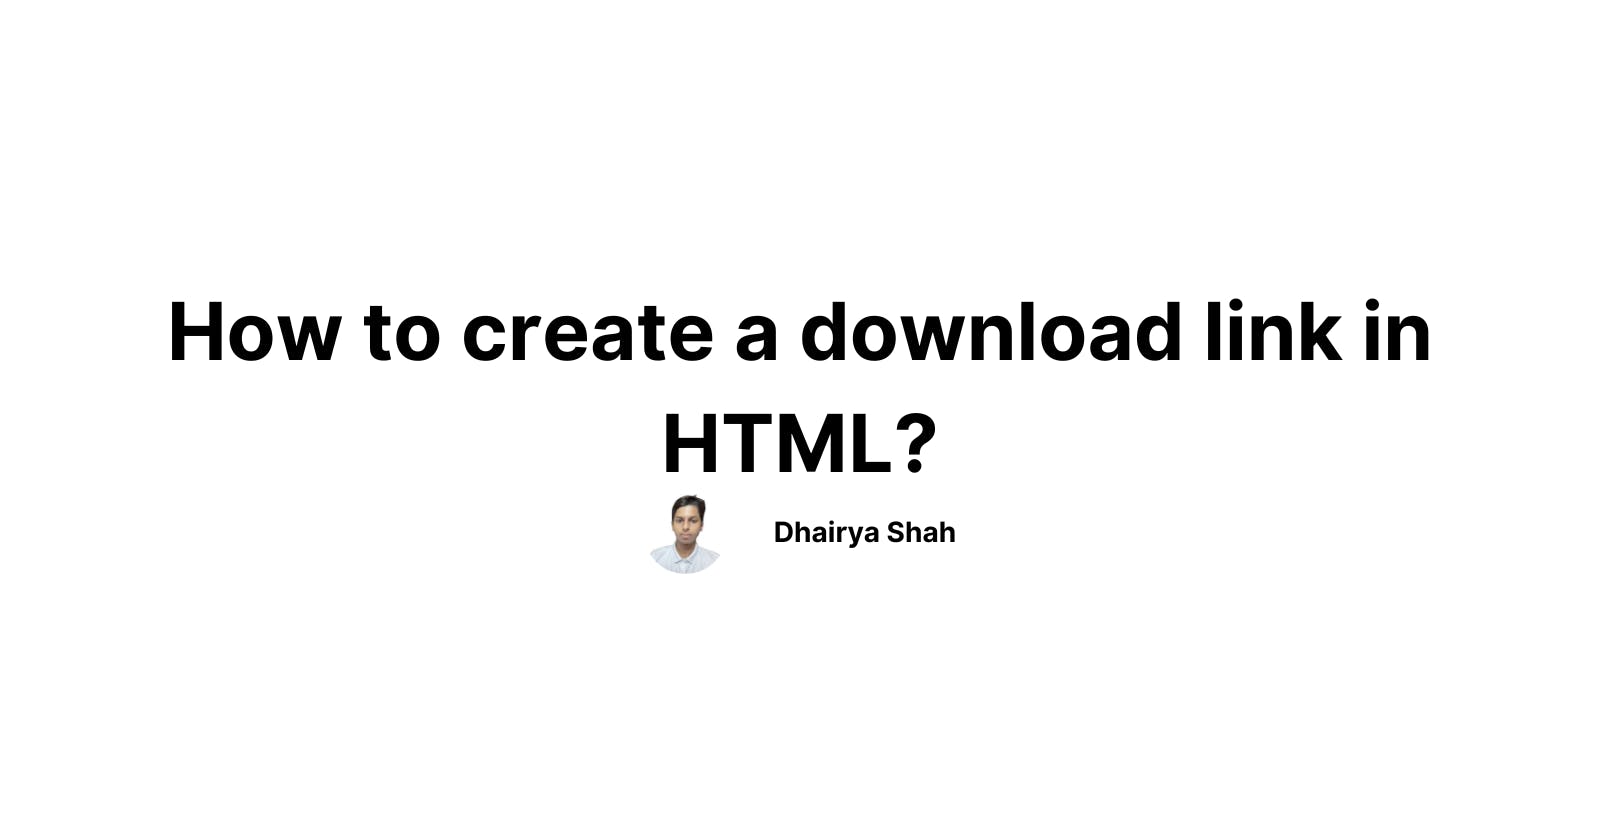 How to create a download link in HTML?